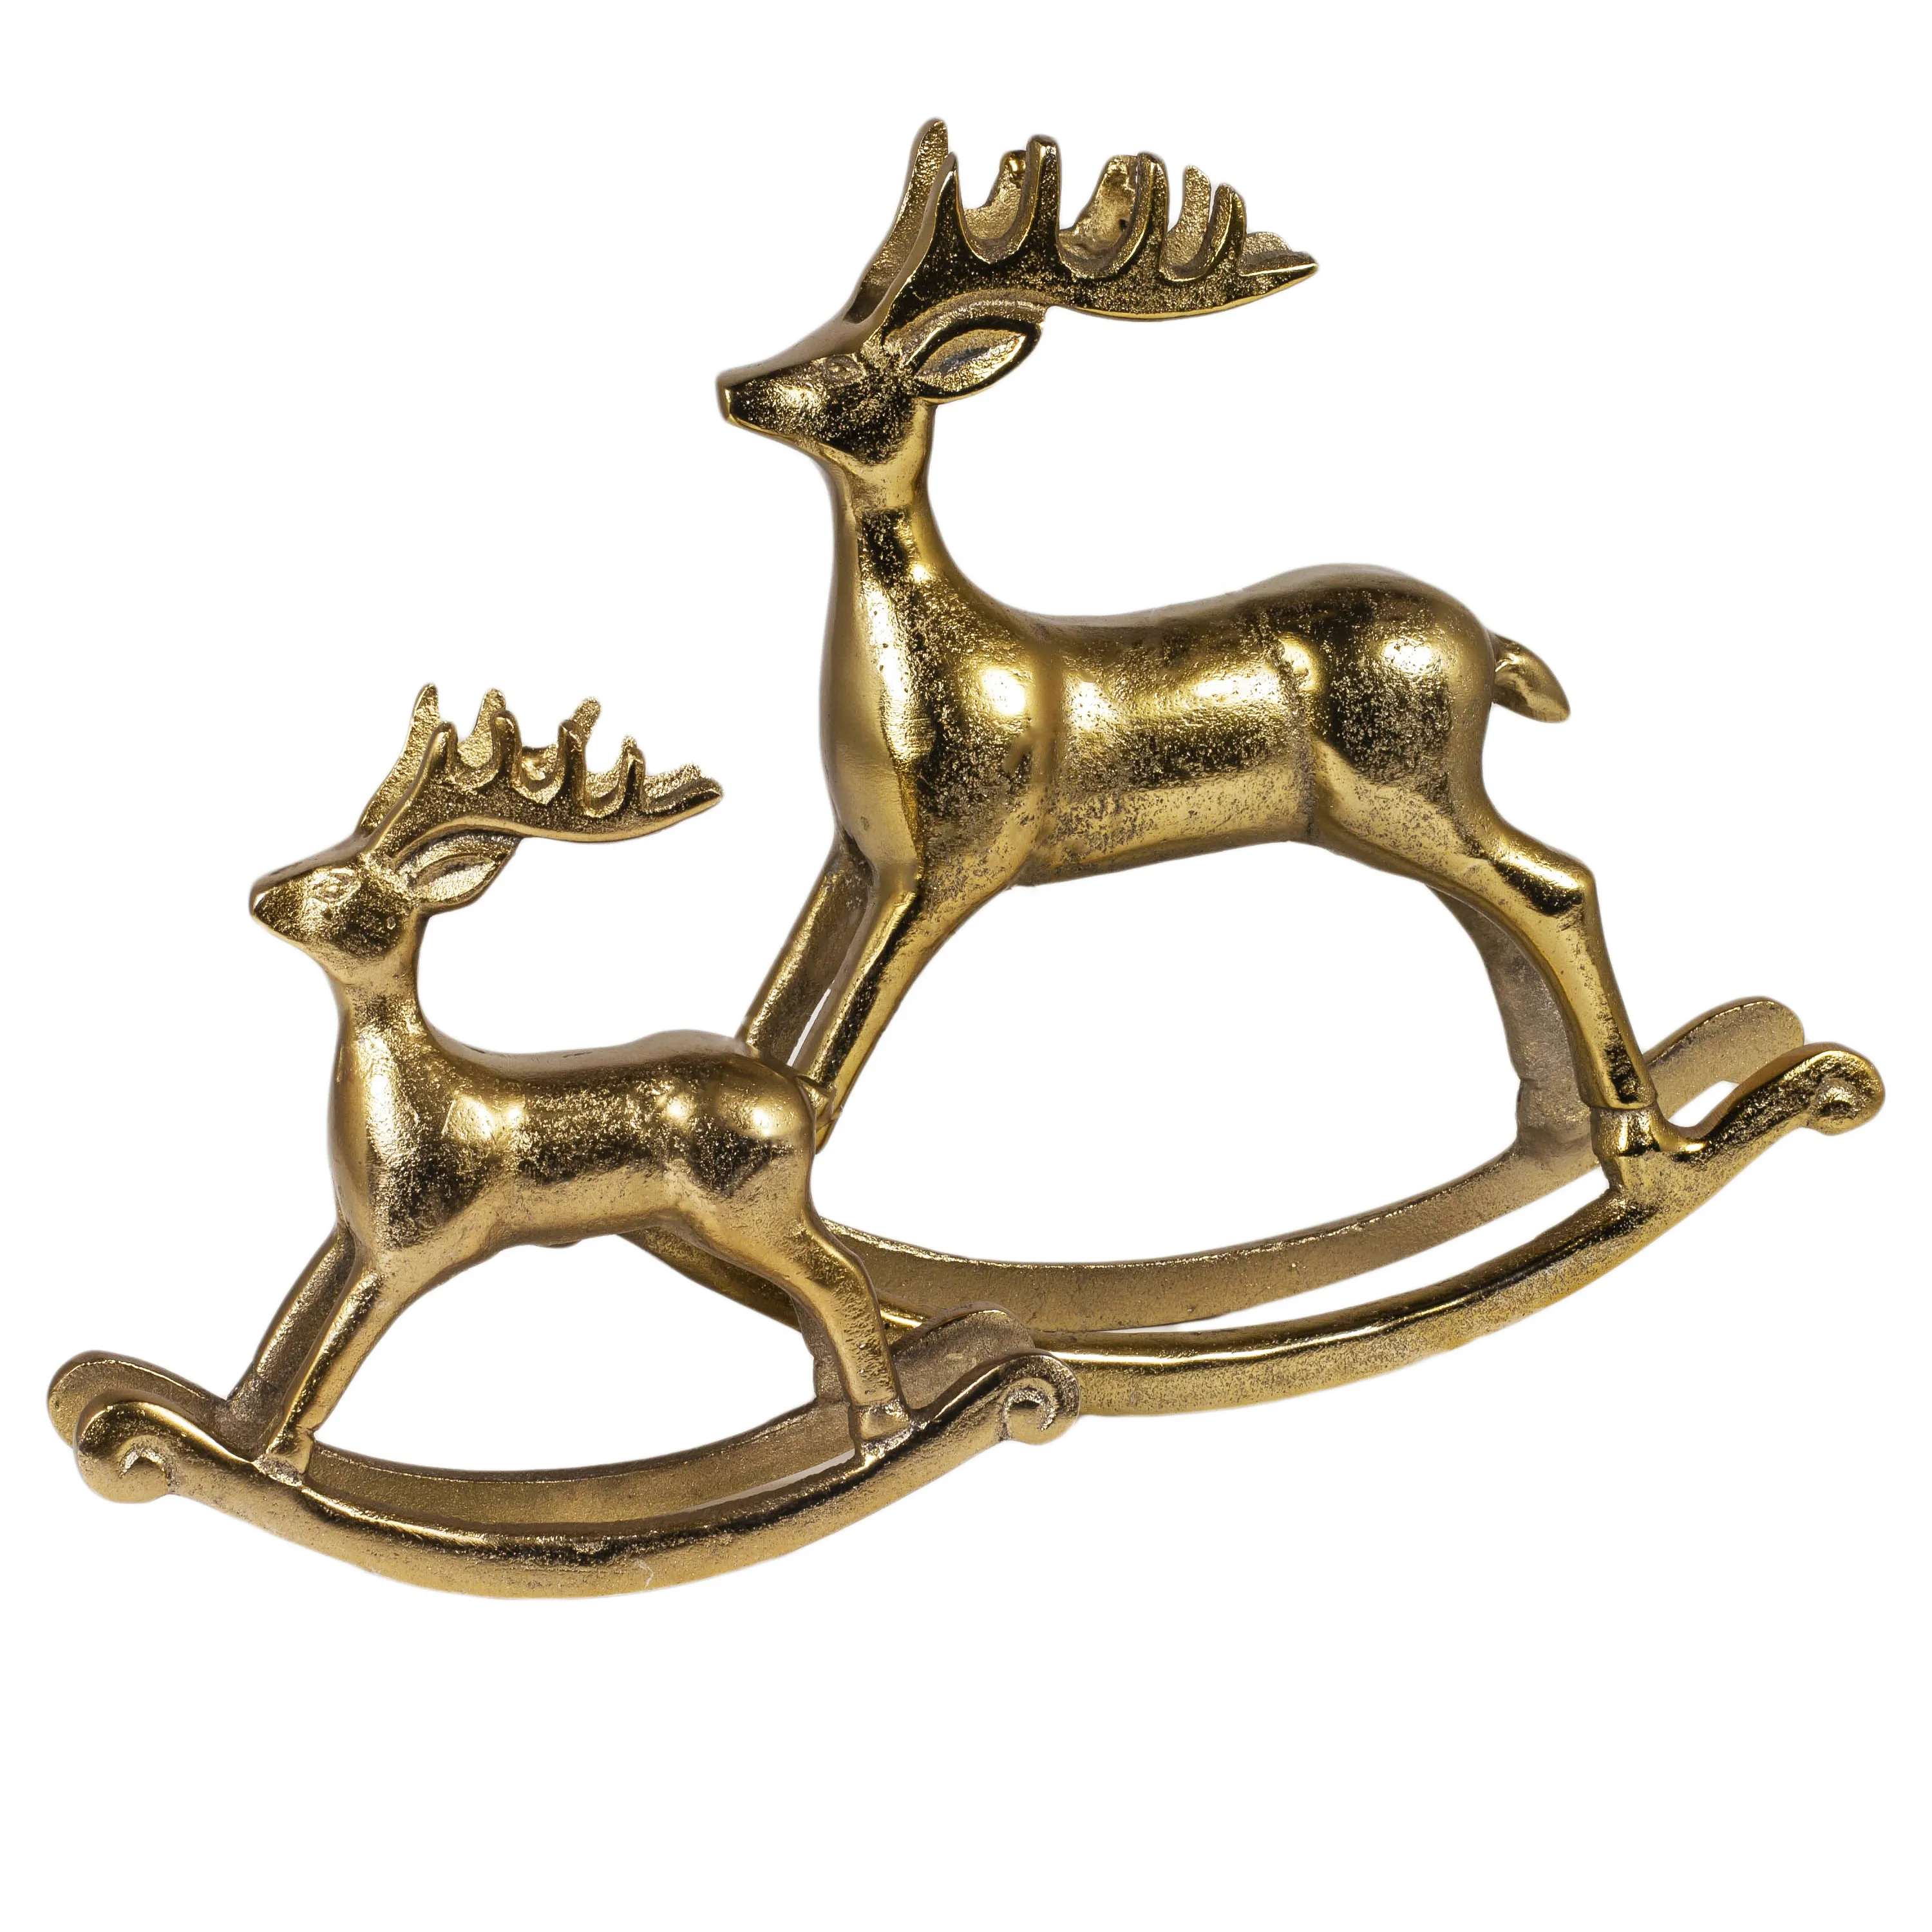 Metal Animal Sculptures Figurine Statues Set Of 2 Metal Deer Ornaments For Christmas & Home Decoration Accents Living Room